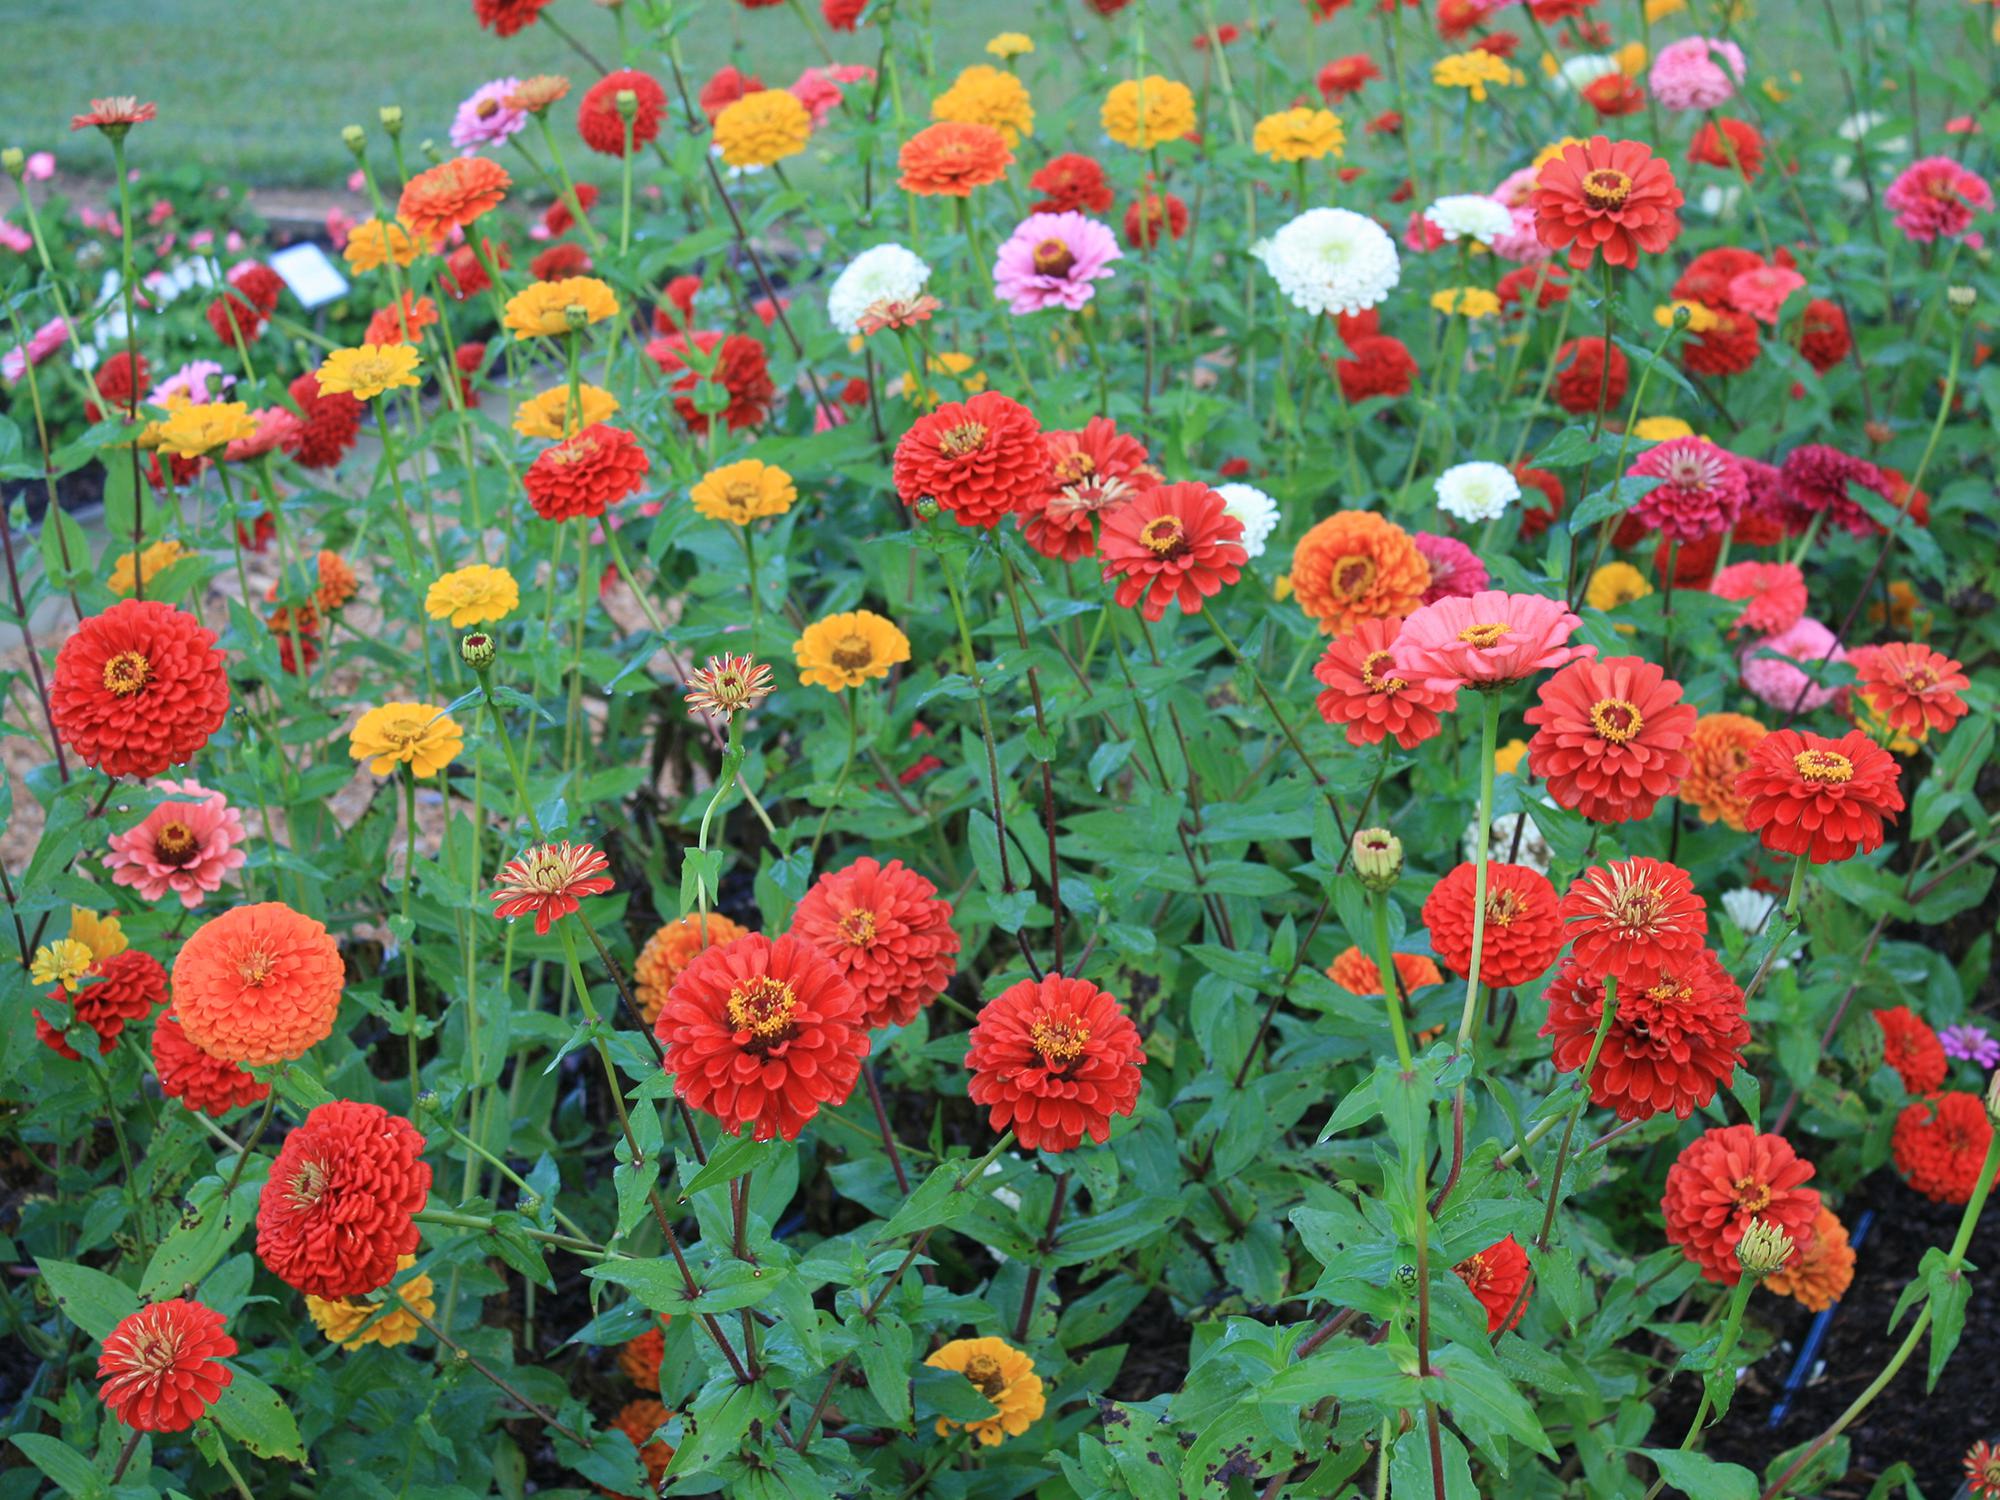 Free-standing blooms in red, orange, yellow and pink fill the frame against a background of green leaves.